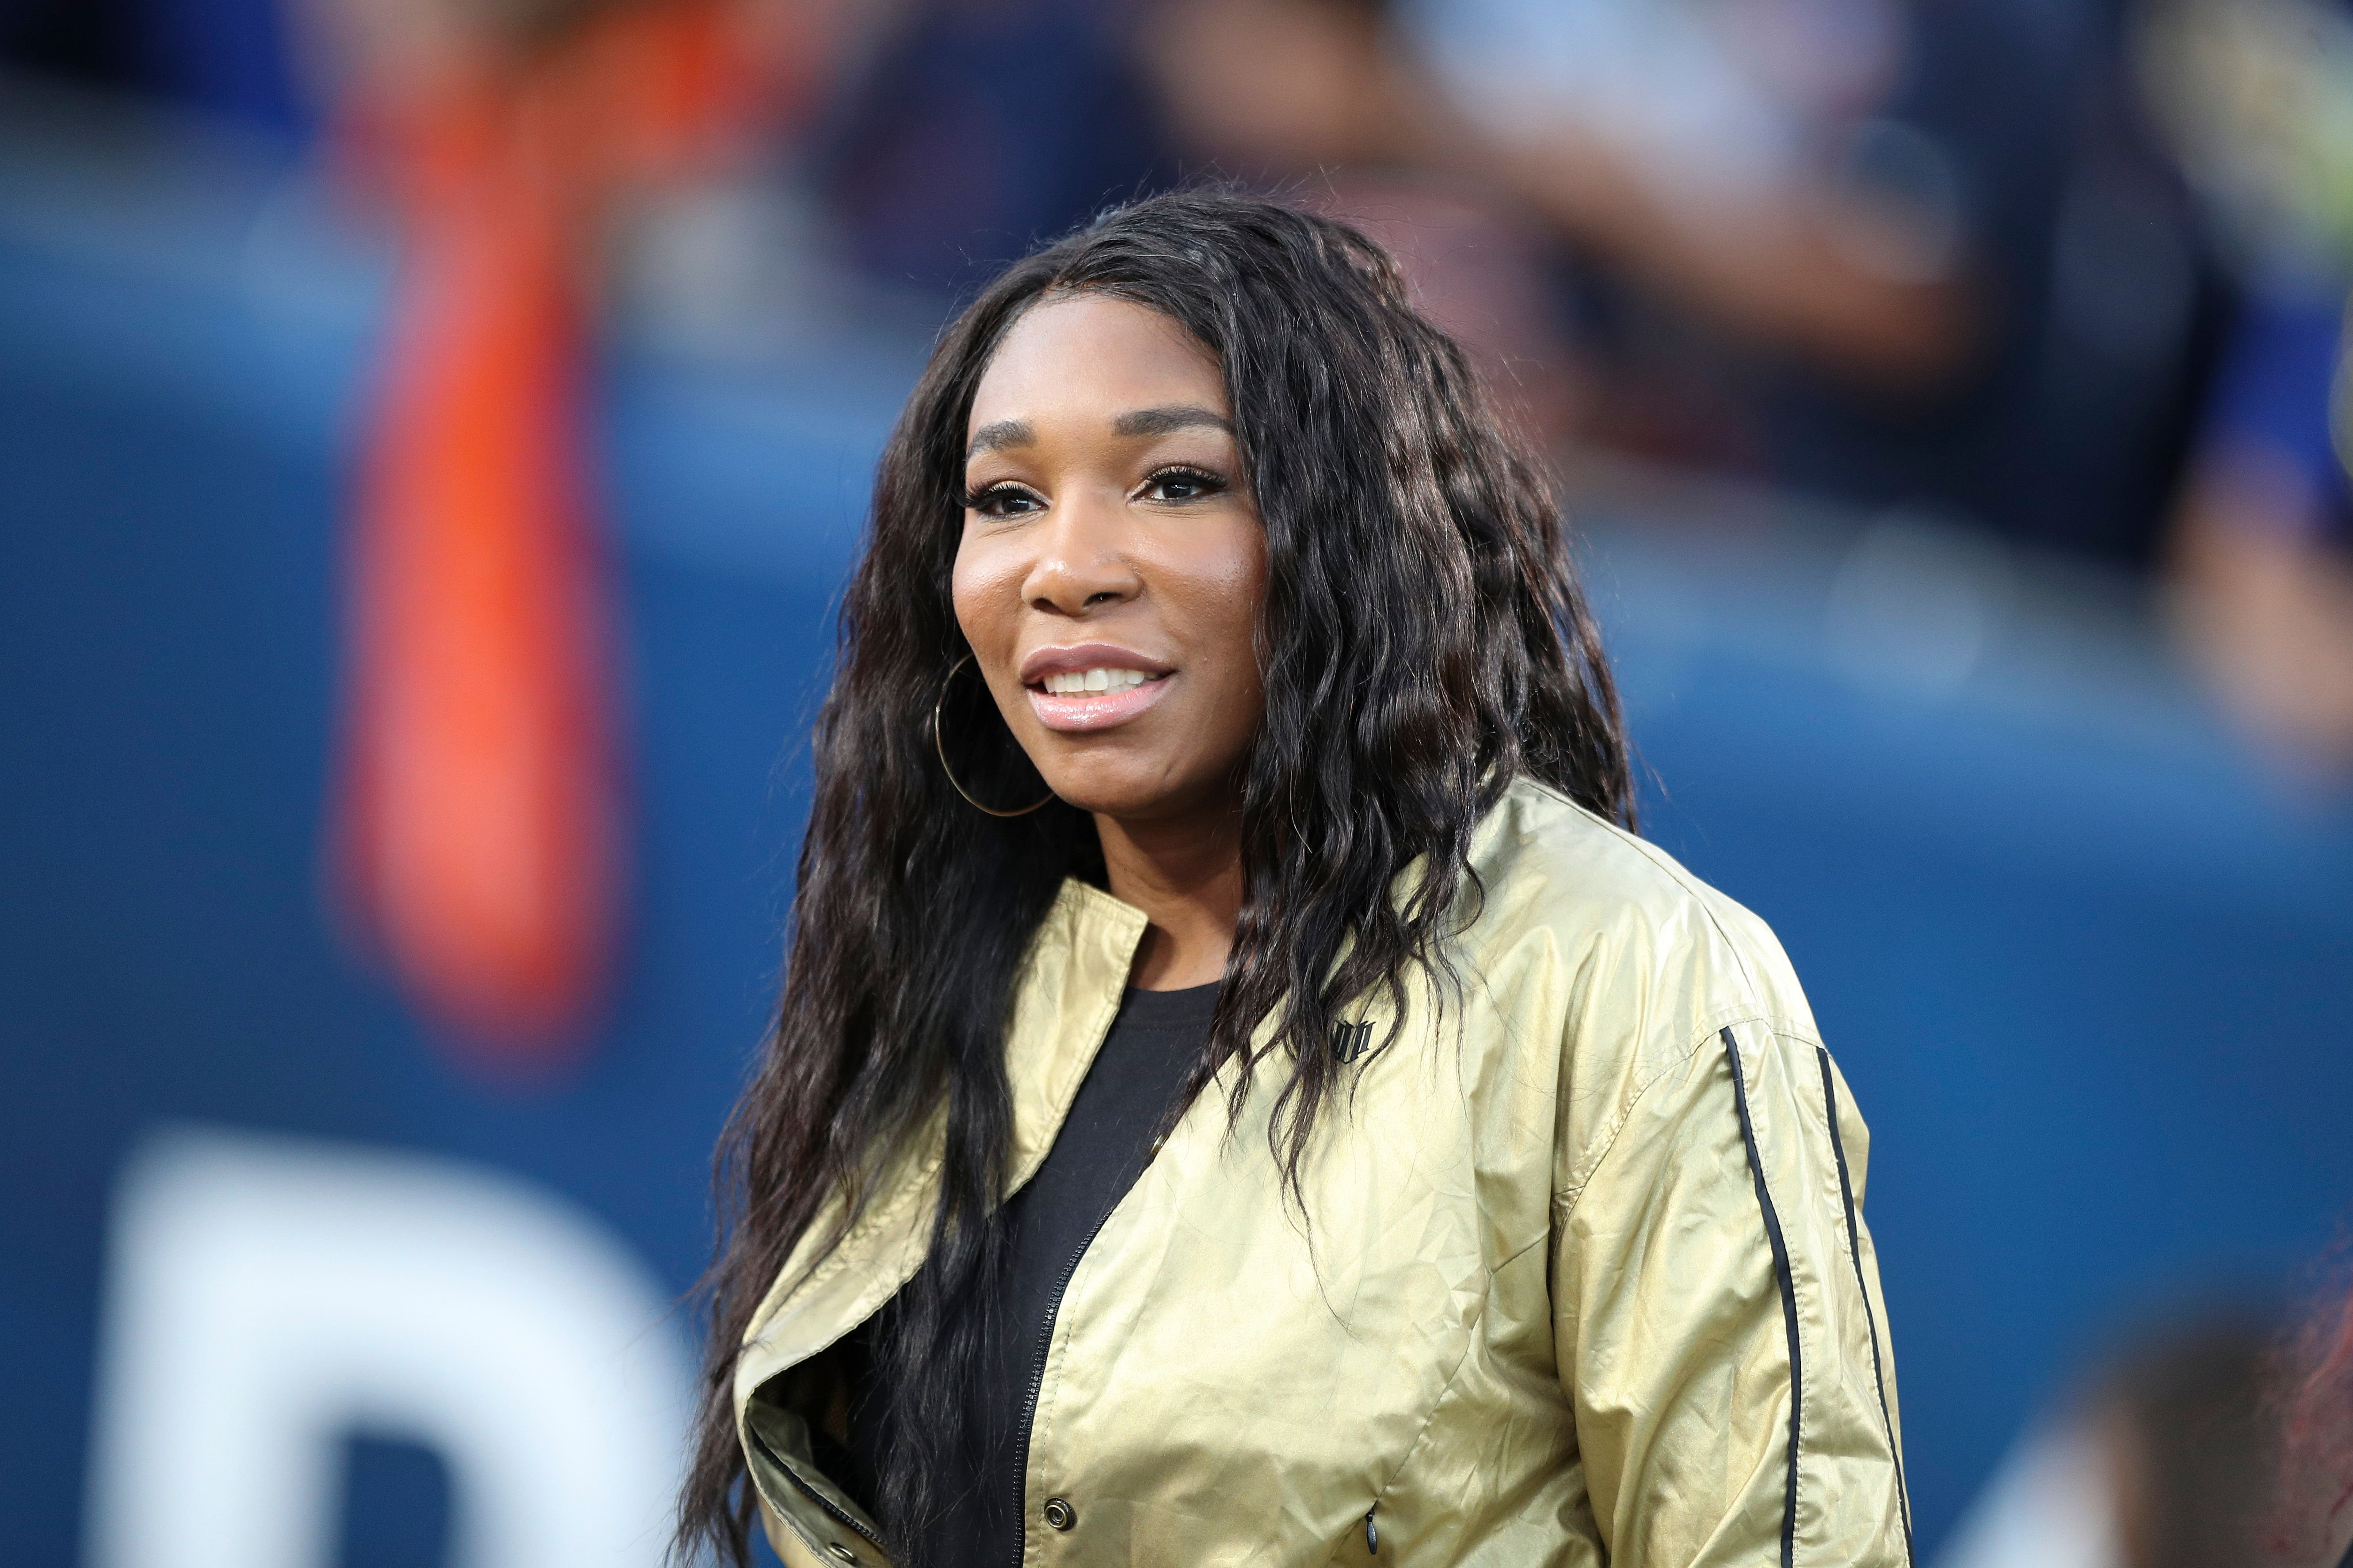 Venus Williams at the game between the Los Angeles Rams and the Chicago Bears on November 17, 2019 | Photo: Getty Images